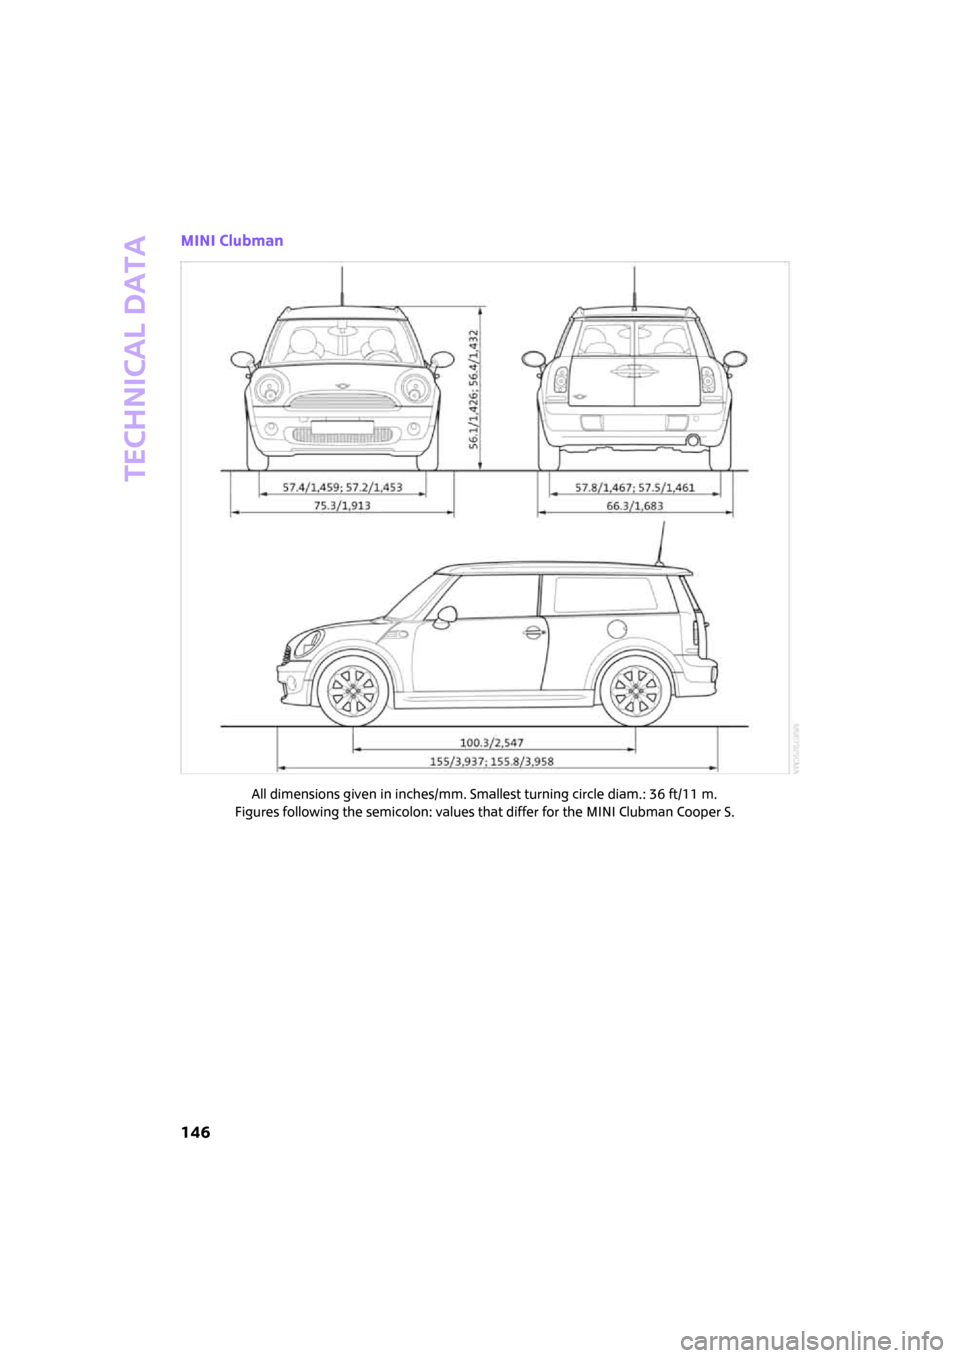 MINI Clubman 2008  Owners Manual Technical data
146
MINI Clubman
All dimensions given in inches/mm. Smallest turning circle diam.: 36 ft/11 m. 
Figures following the semicolon: values that differ for the MINI Clubman Cooper S. 